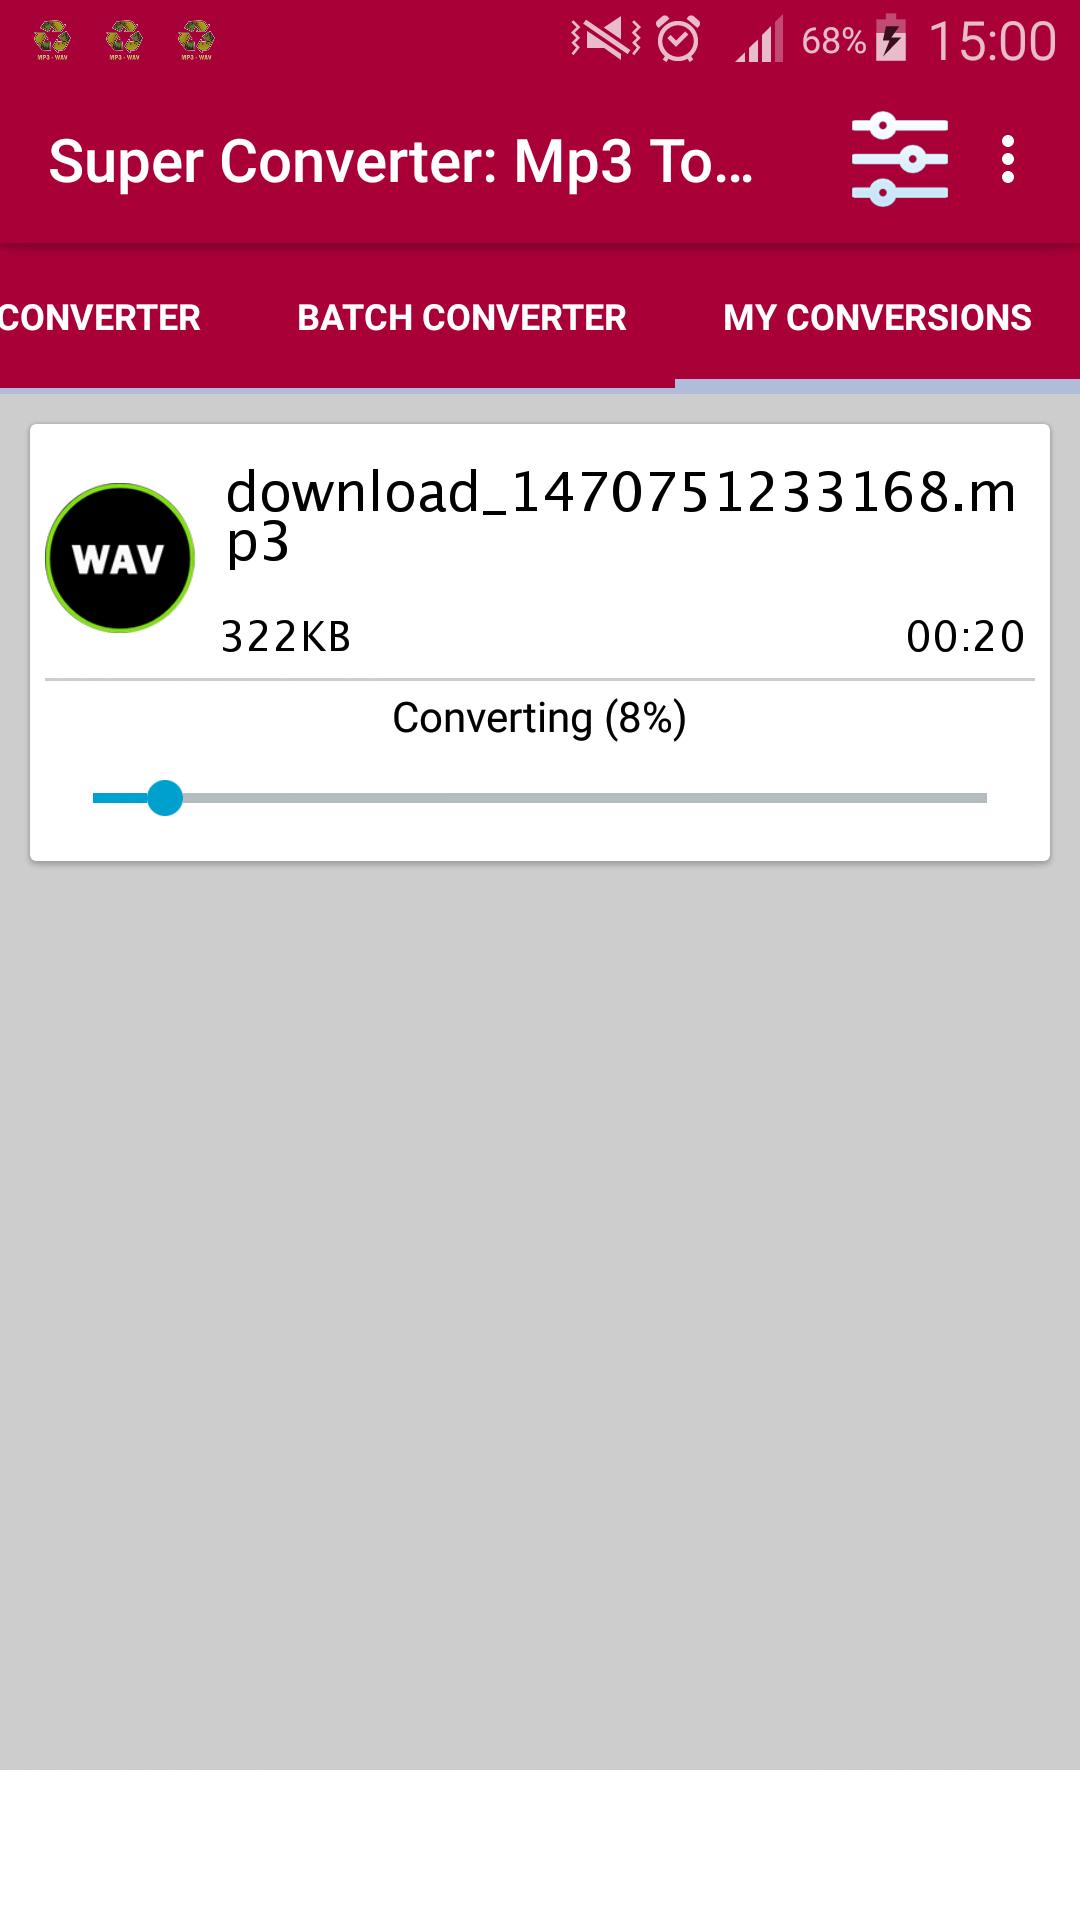 Super Converter : MP3 To WAV for Android - APK Download